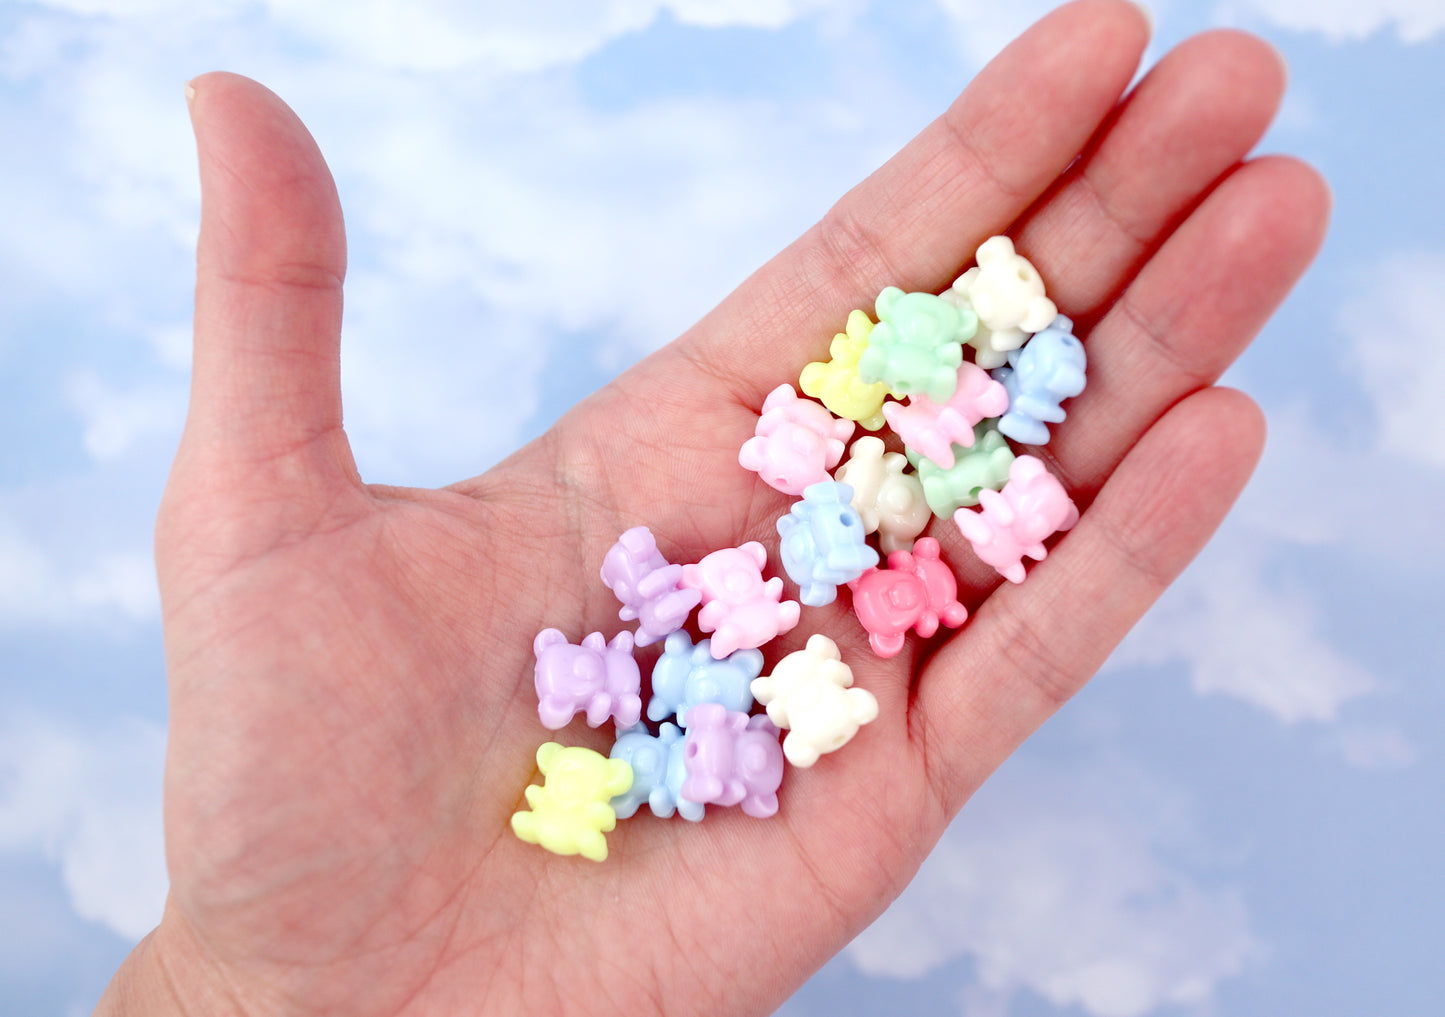 Pastel Beads - 12mm Tiny Pastel Teddy Bear Bright Color Acrylic or Plastic Beads - 80 pc set